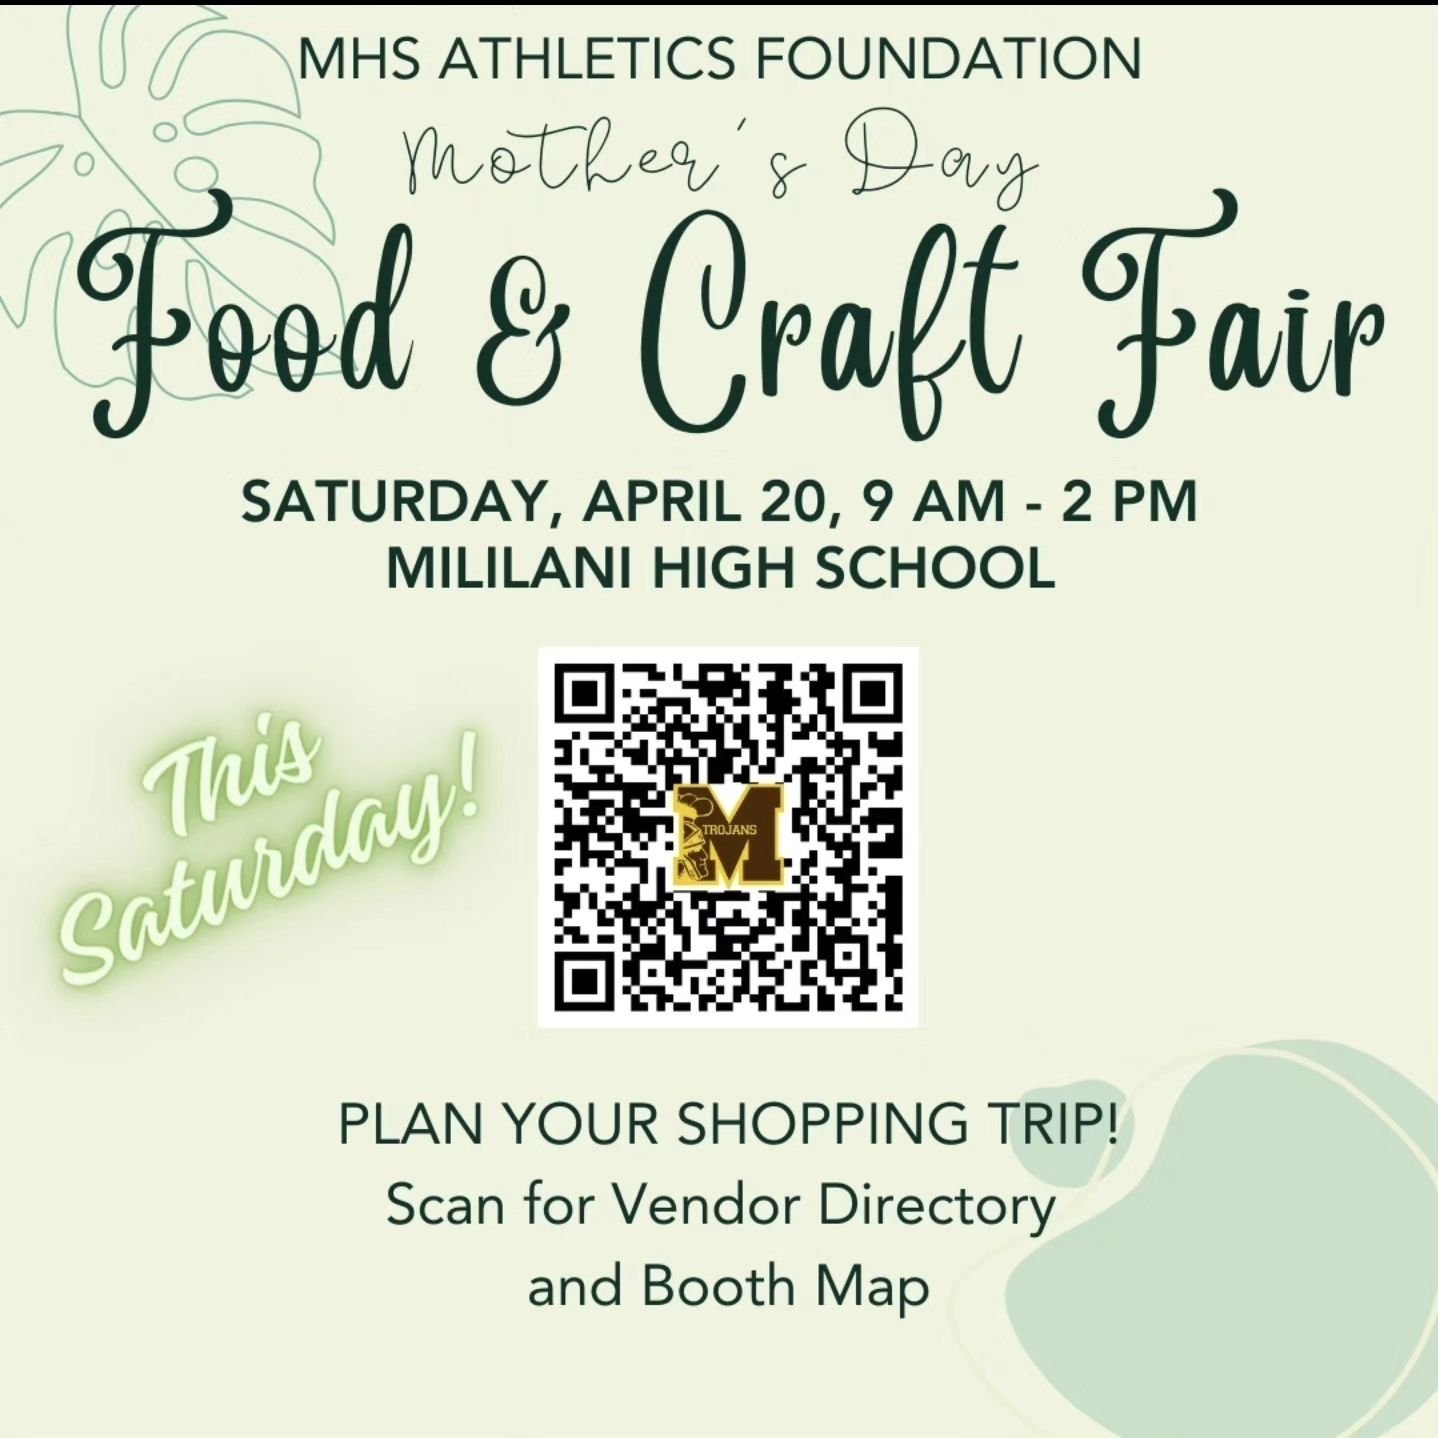 Here's something to help you navigate your shopping &amp; find your favorite vendors tomorrow🛍SCAN THE QR CODE FOR VENDOR DIRECTORY &amp; BOOTH📍You can find us in the parking lot Booth #F20. 

MOTHER'S DAY FOOD &amp; CRAFT 
MILILANI HS 
APRIL 20, S